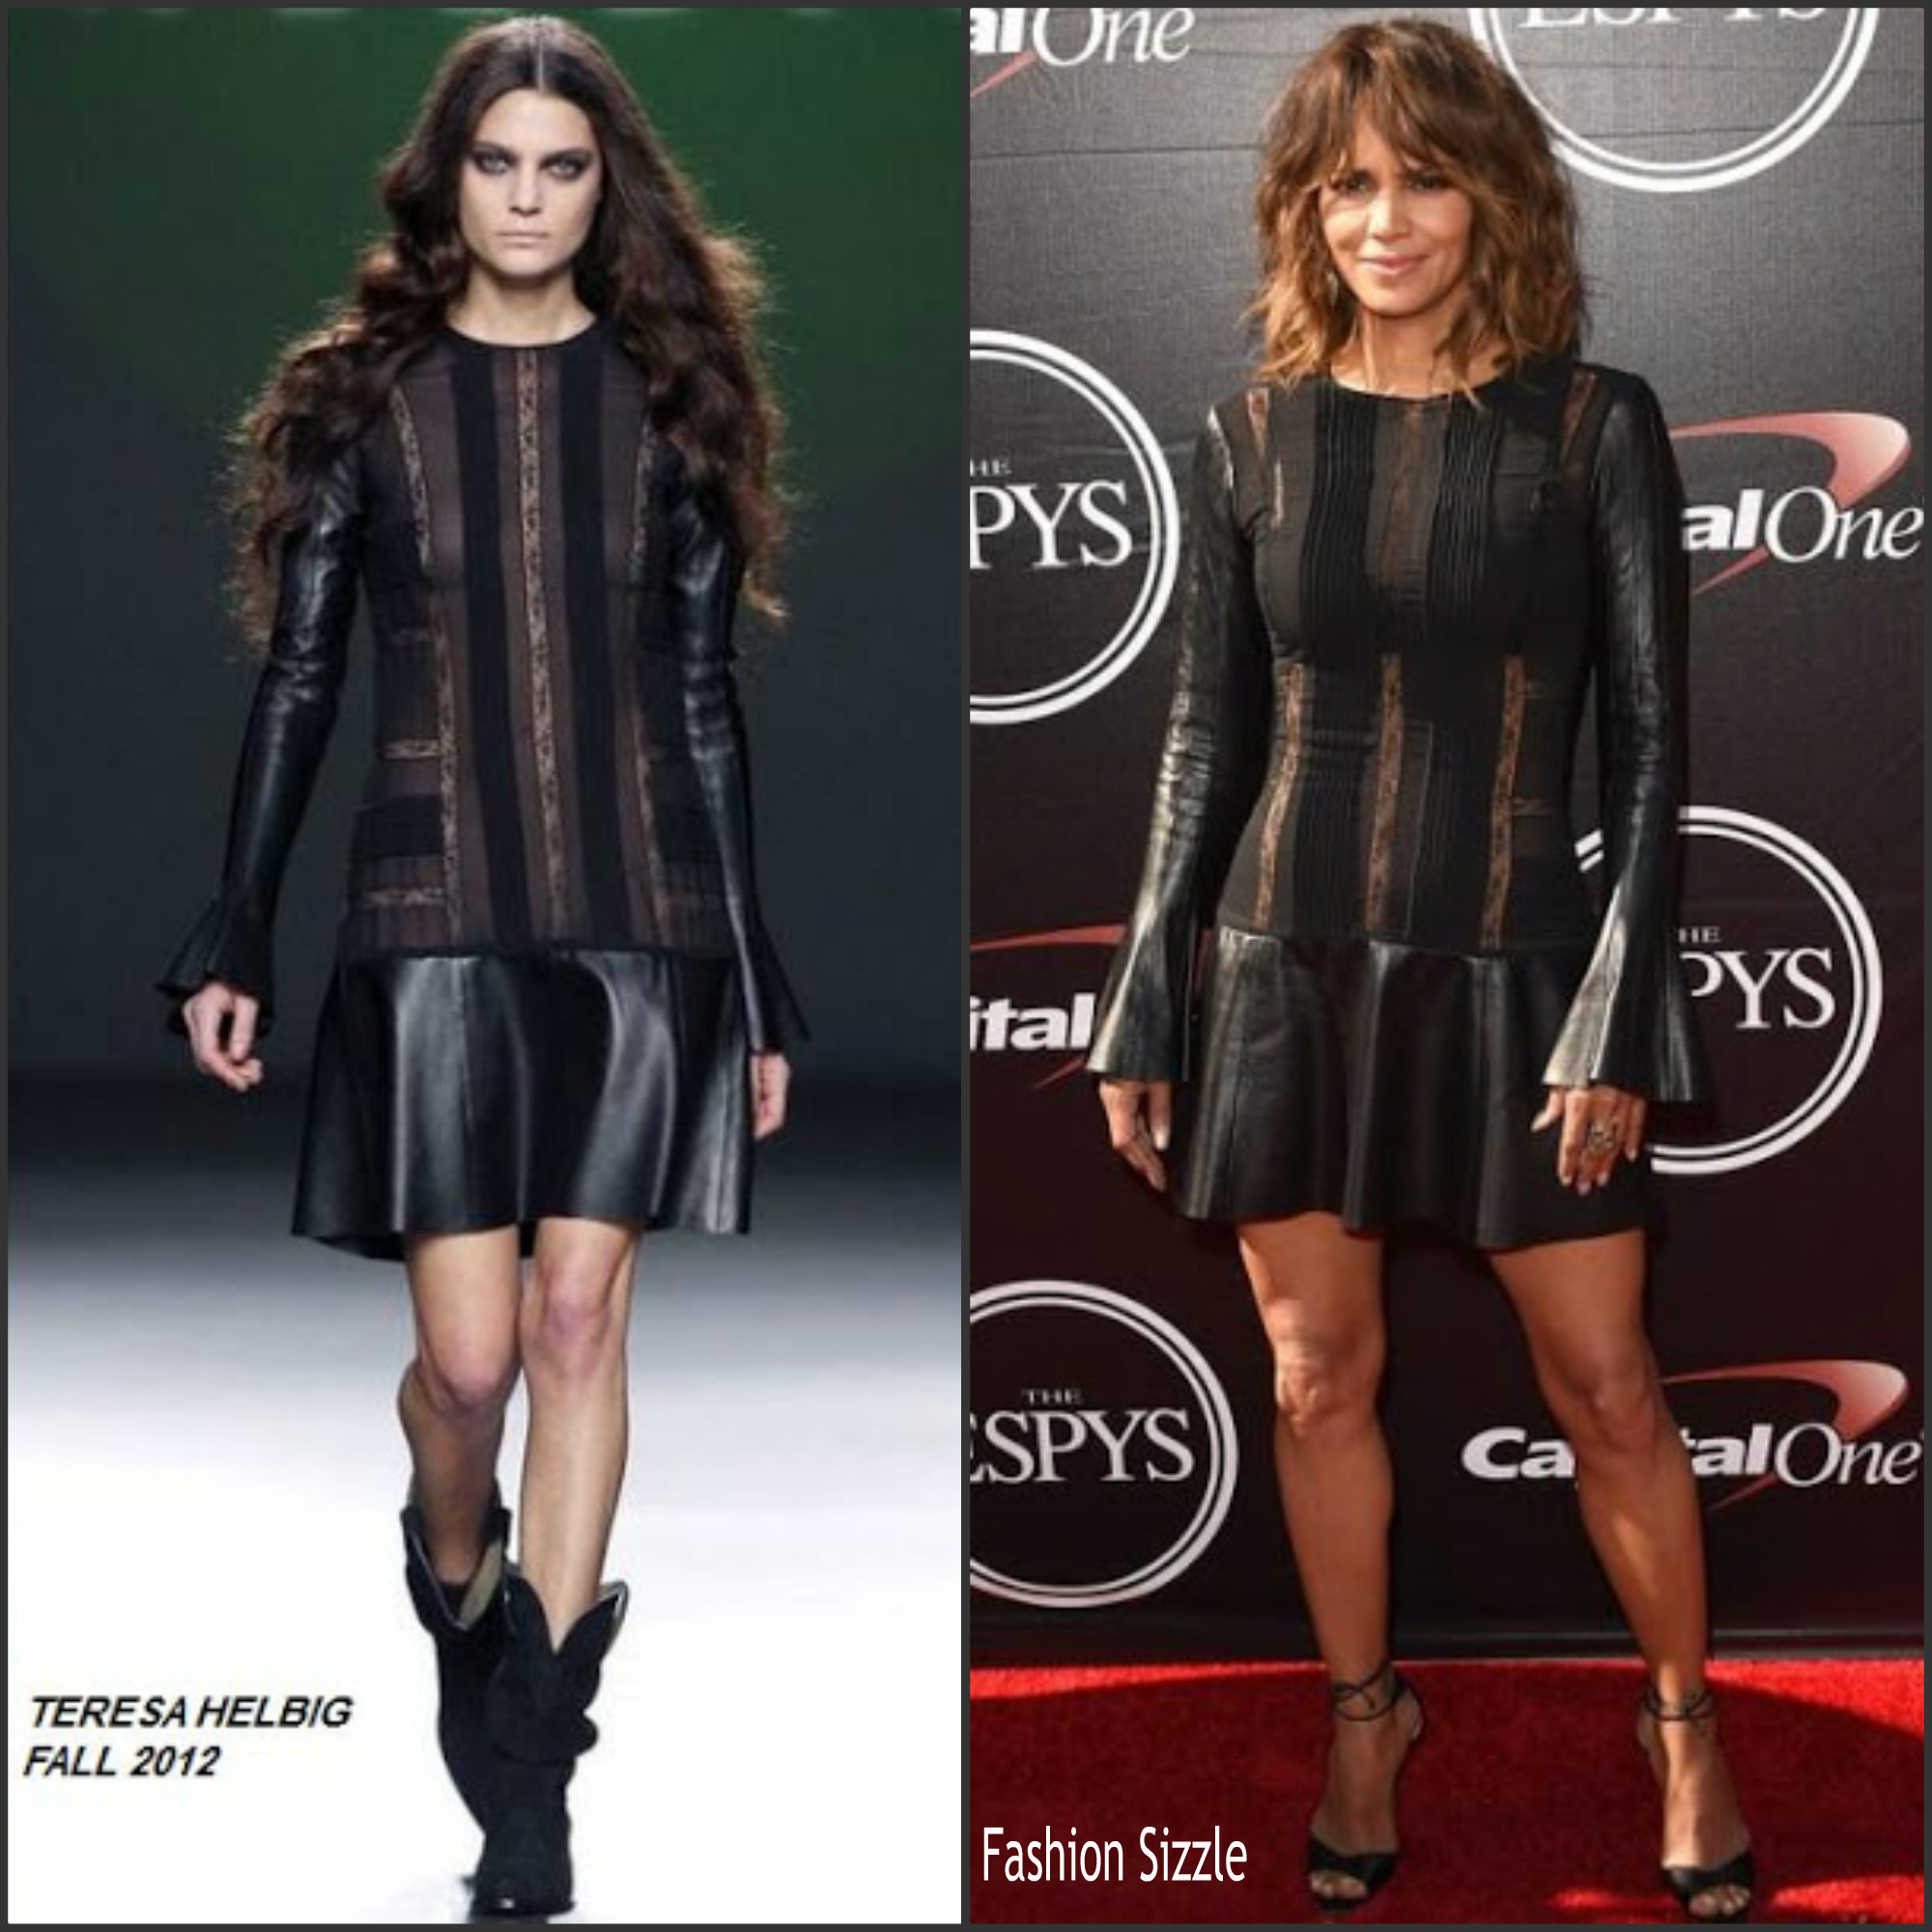 halle-berry-in-teresa-helbig-at-the-2015-espys-awards